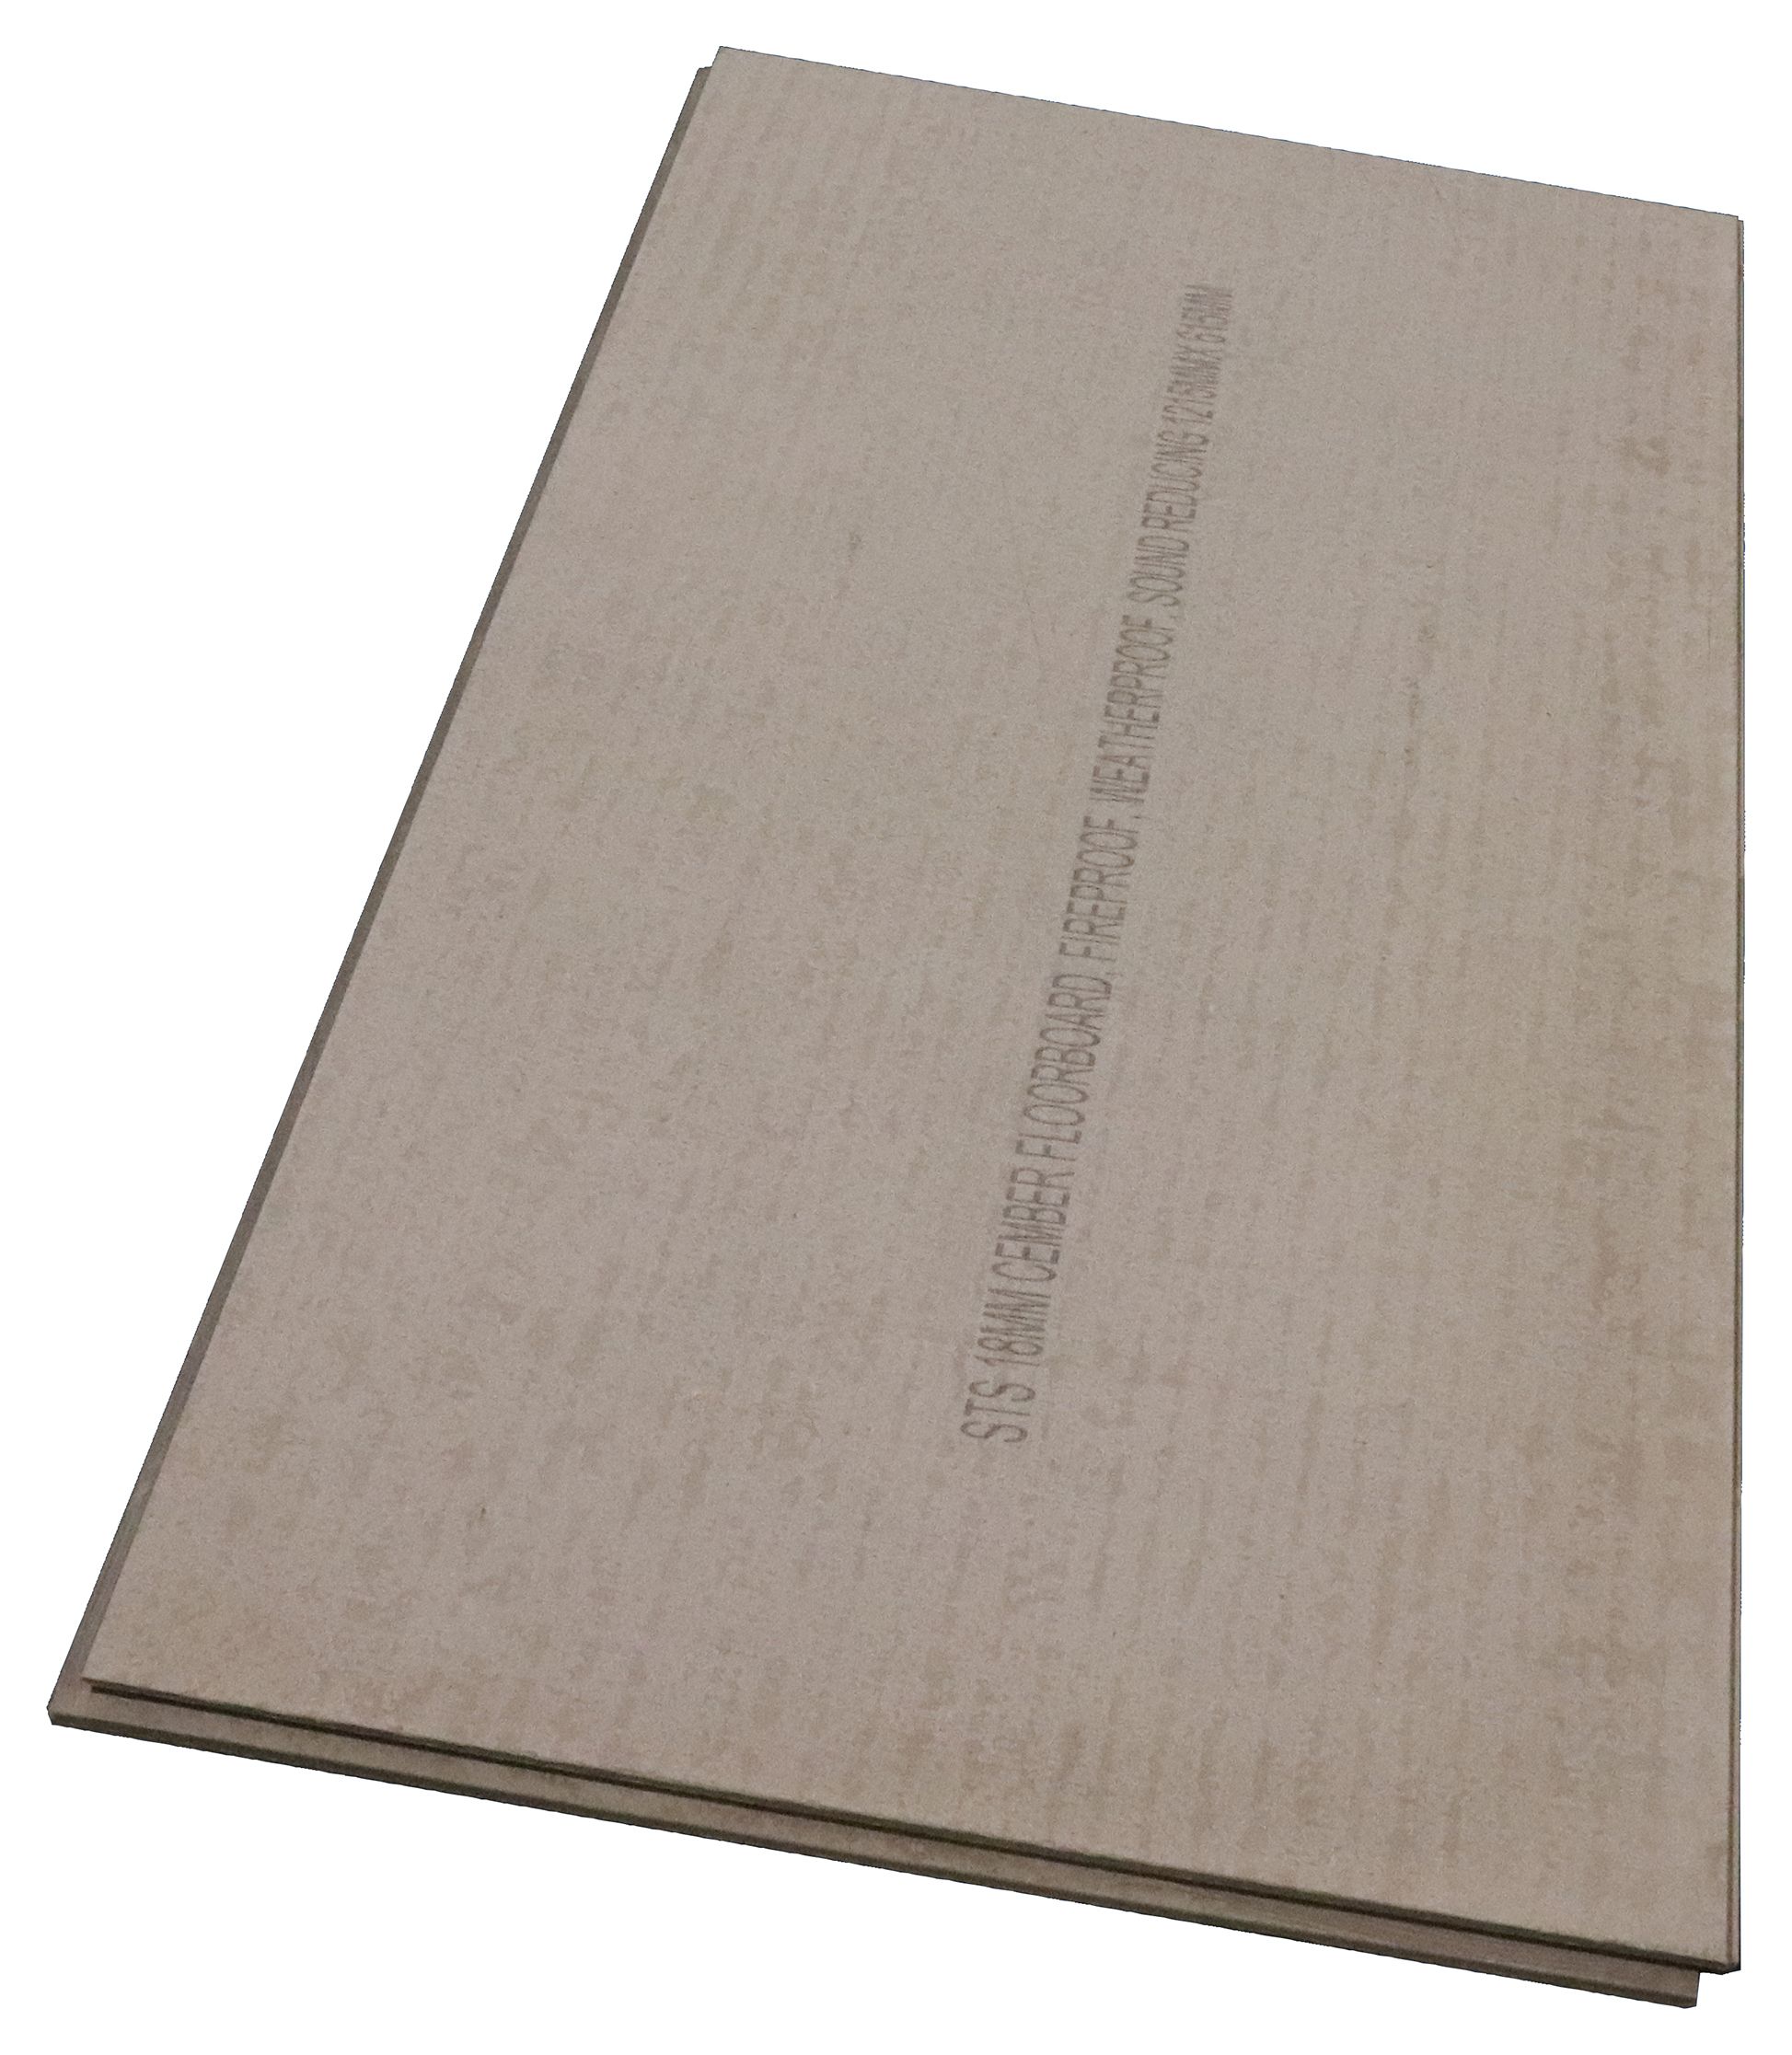 STS NoMorePly TG4 Tile Backer Floor Board - 1200 x 600 x 18mm - Pack of 50